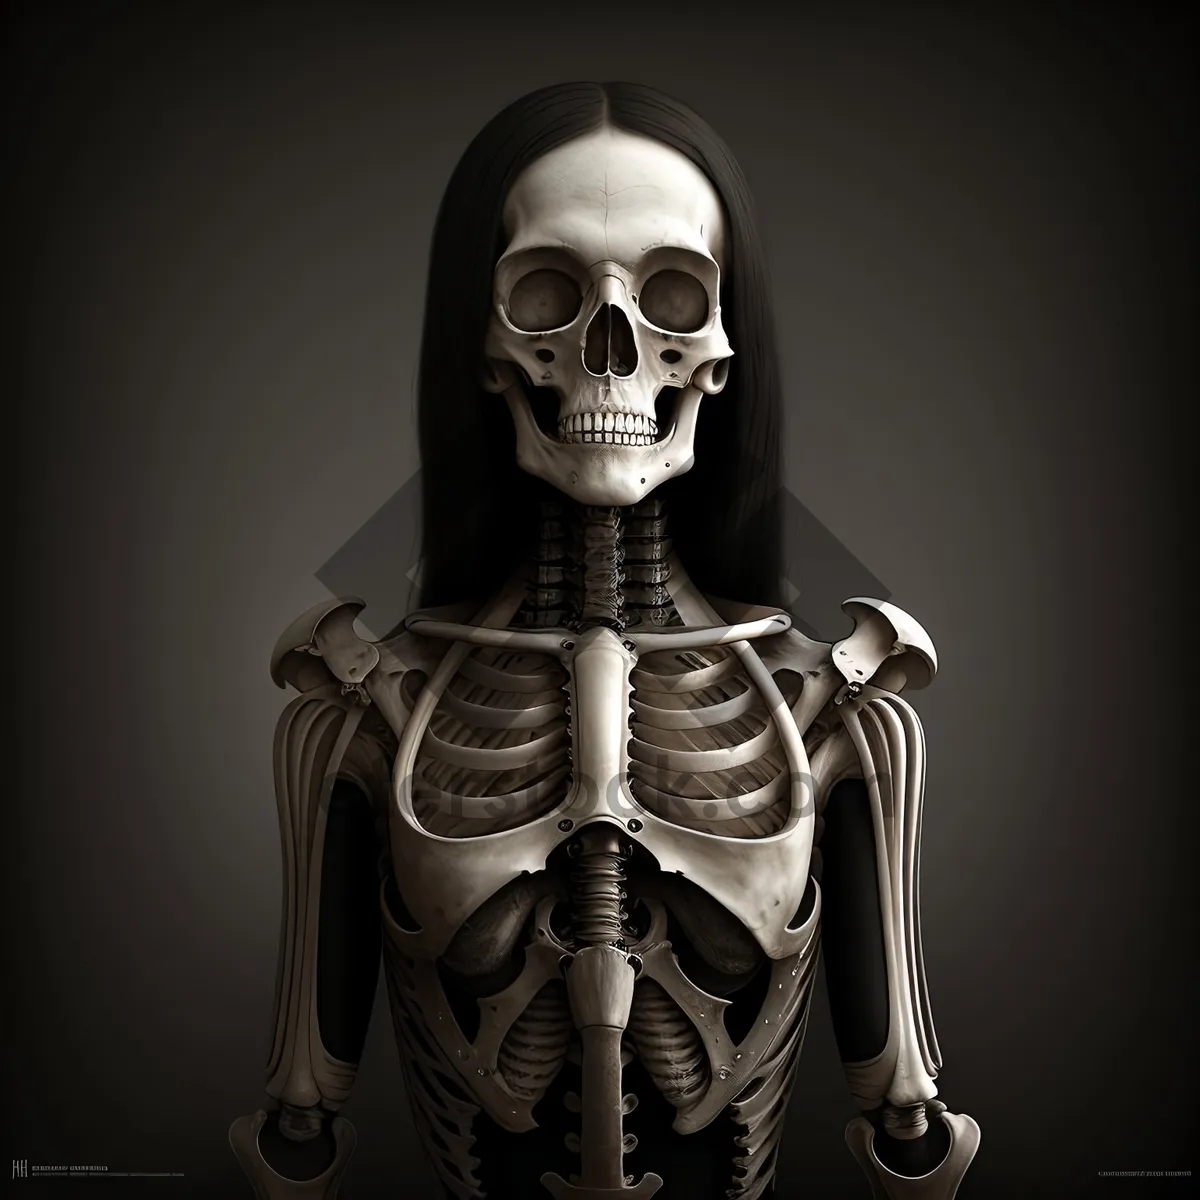 Picture of Anatomical Horror: Scary 3D X-ray of Skeleton Head